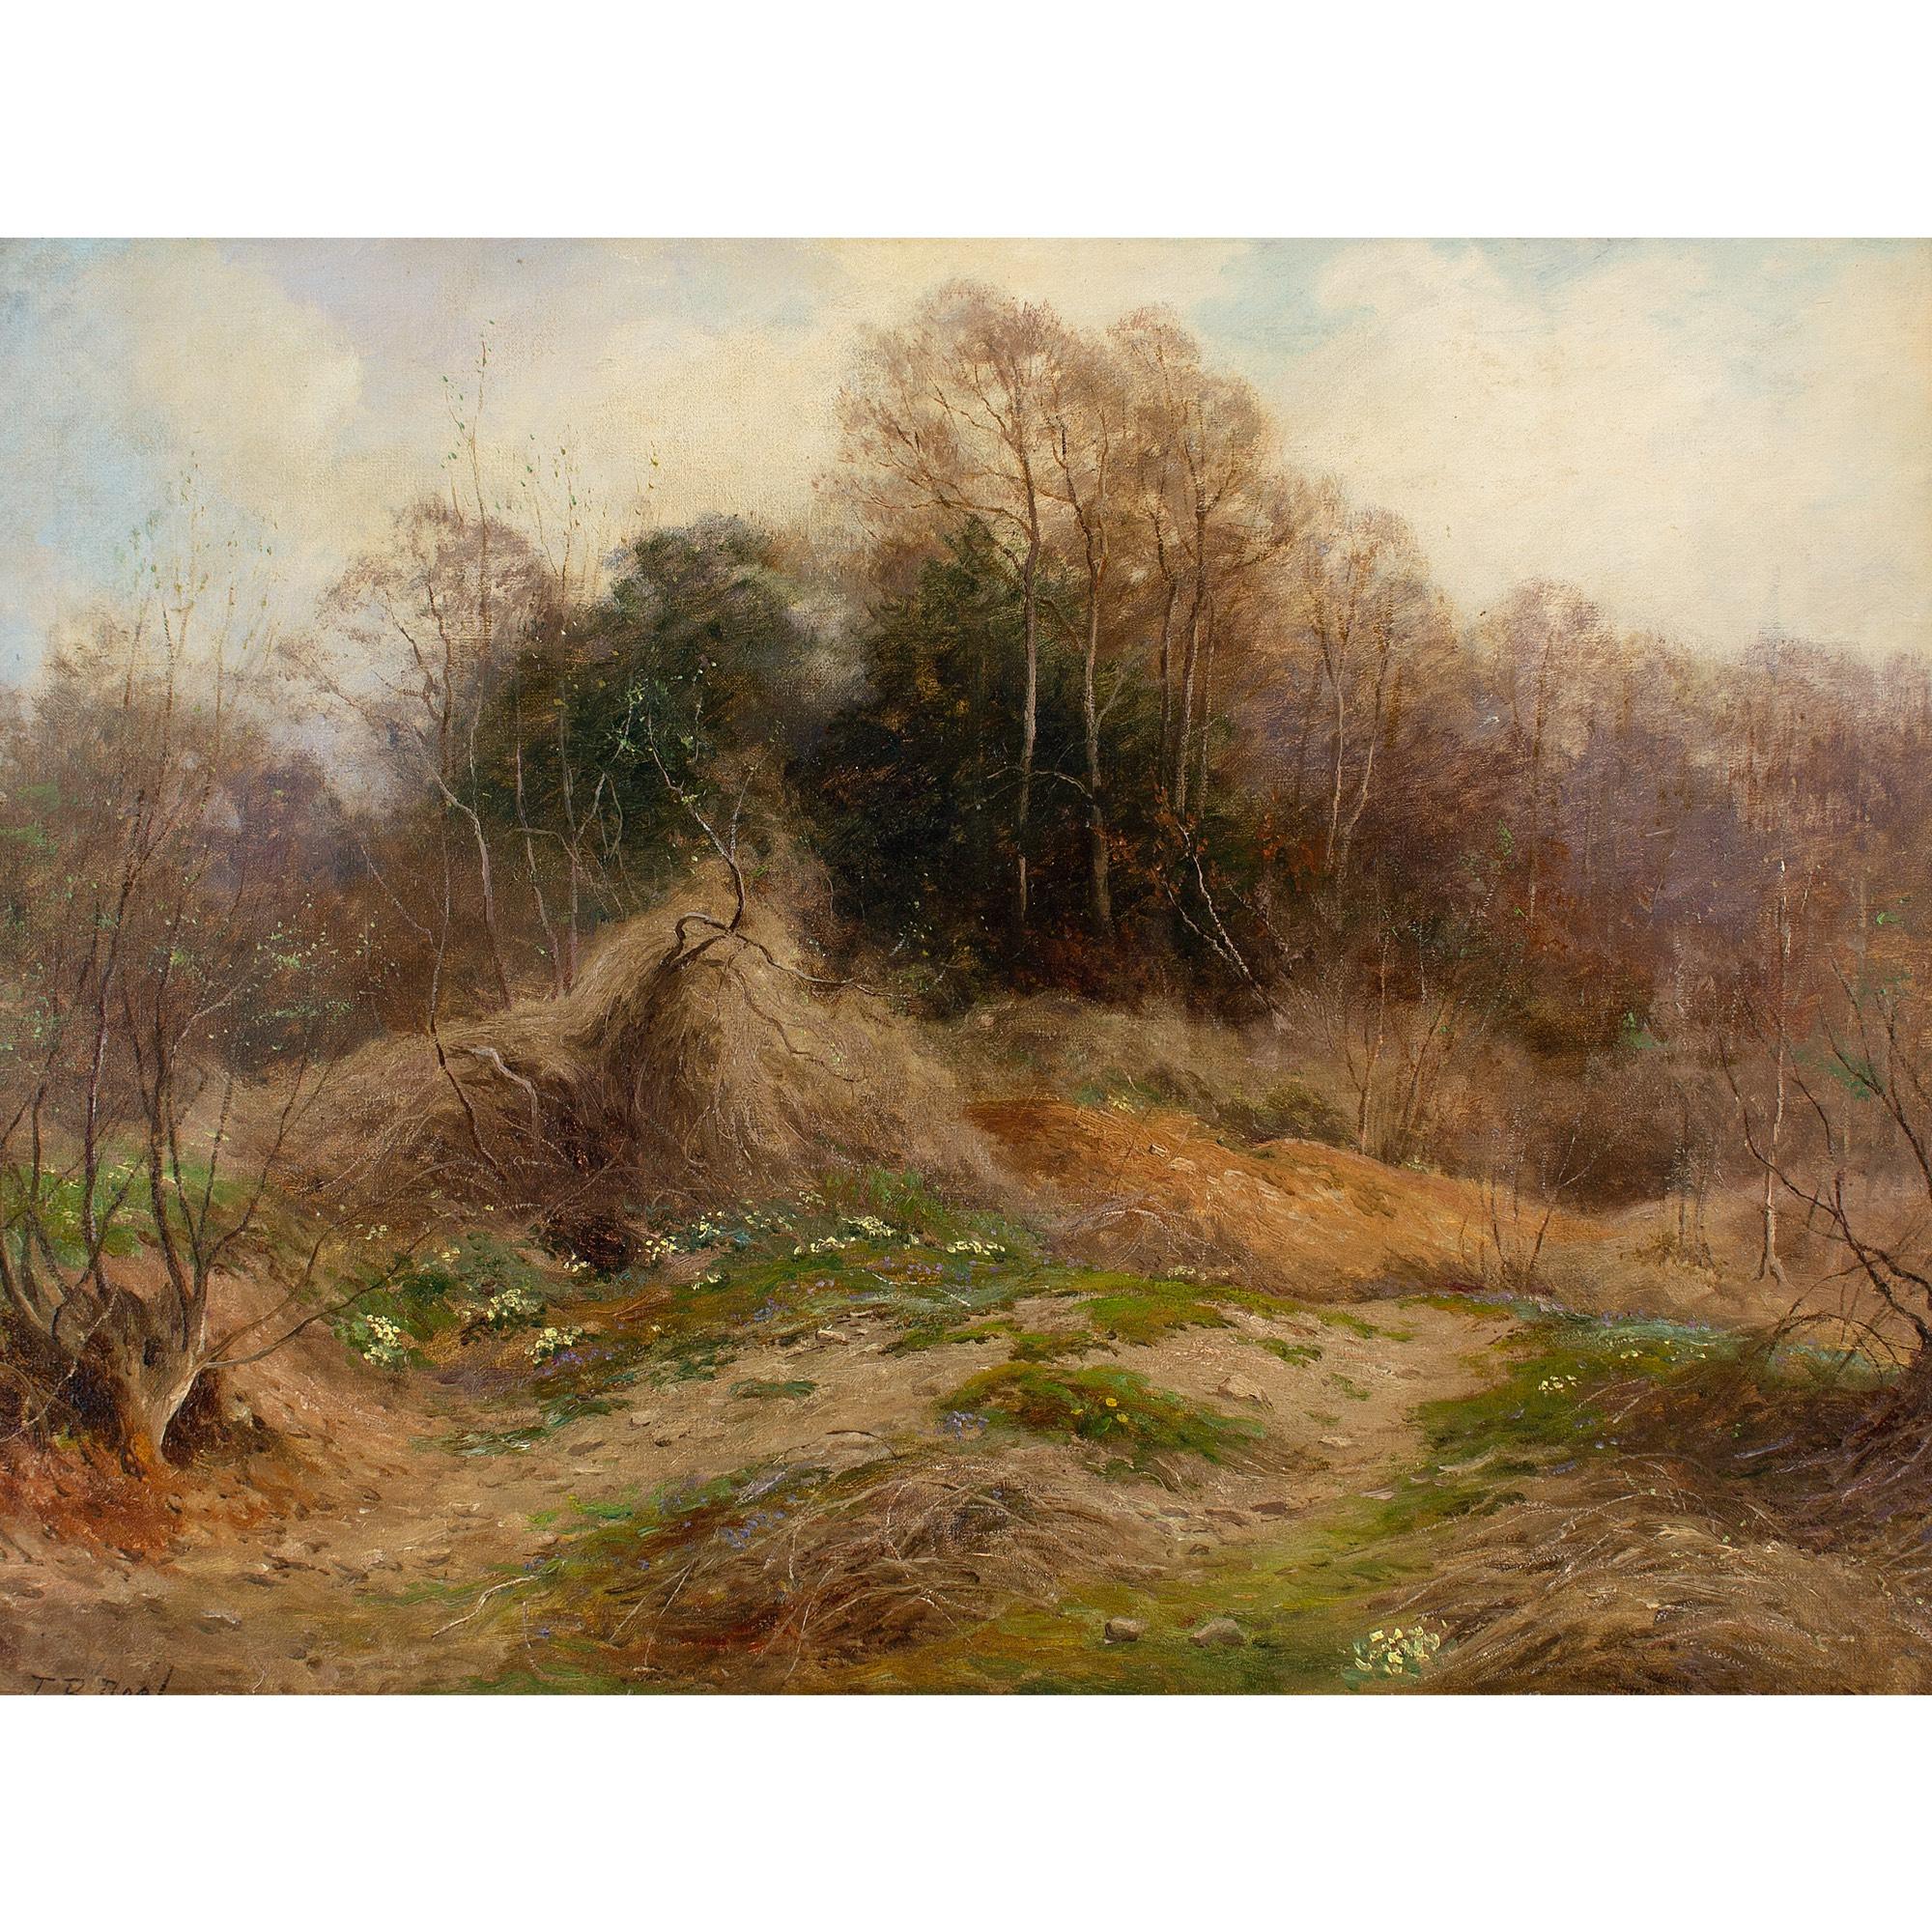 This early 20th-century oil painting by British artist John Bates Noel (1870-1927) depicts a rugged country track in April.

Amid the desolate branches emerging from Winter, pockets of yellow primroses indicate the first blooms of Spring. It’s